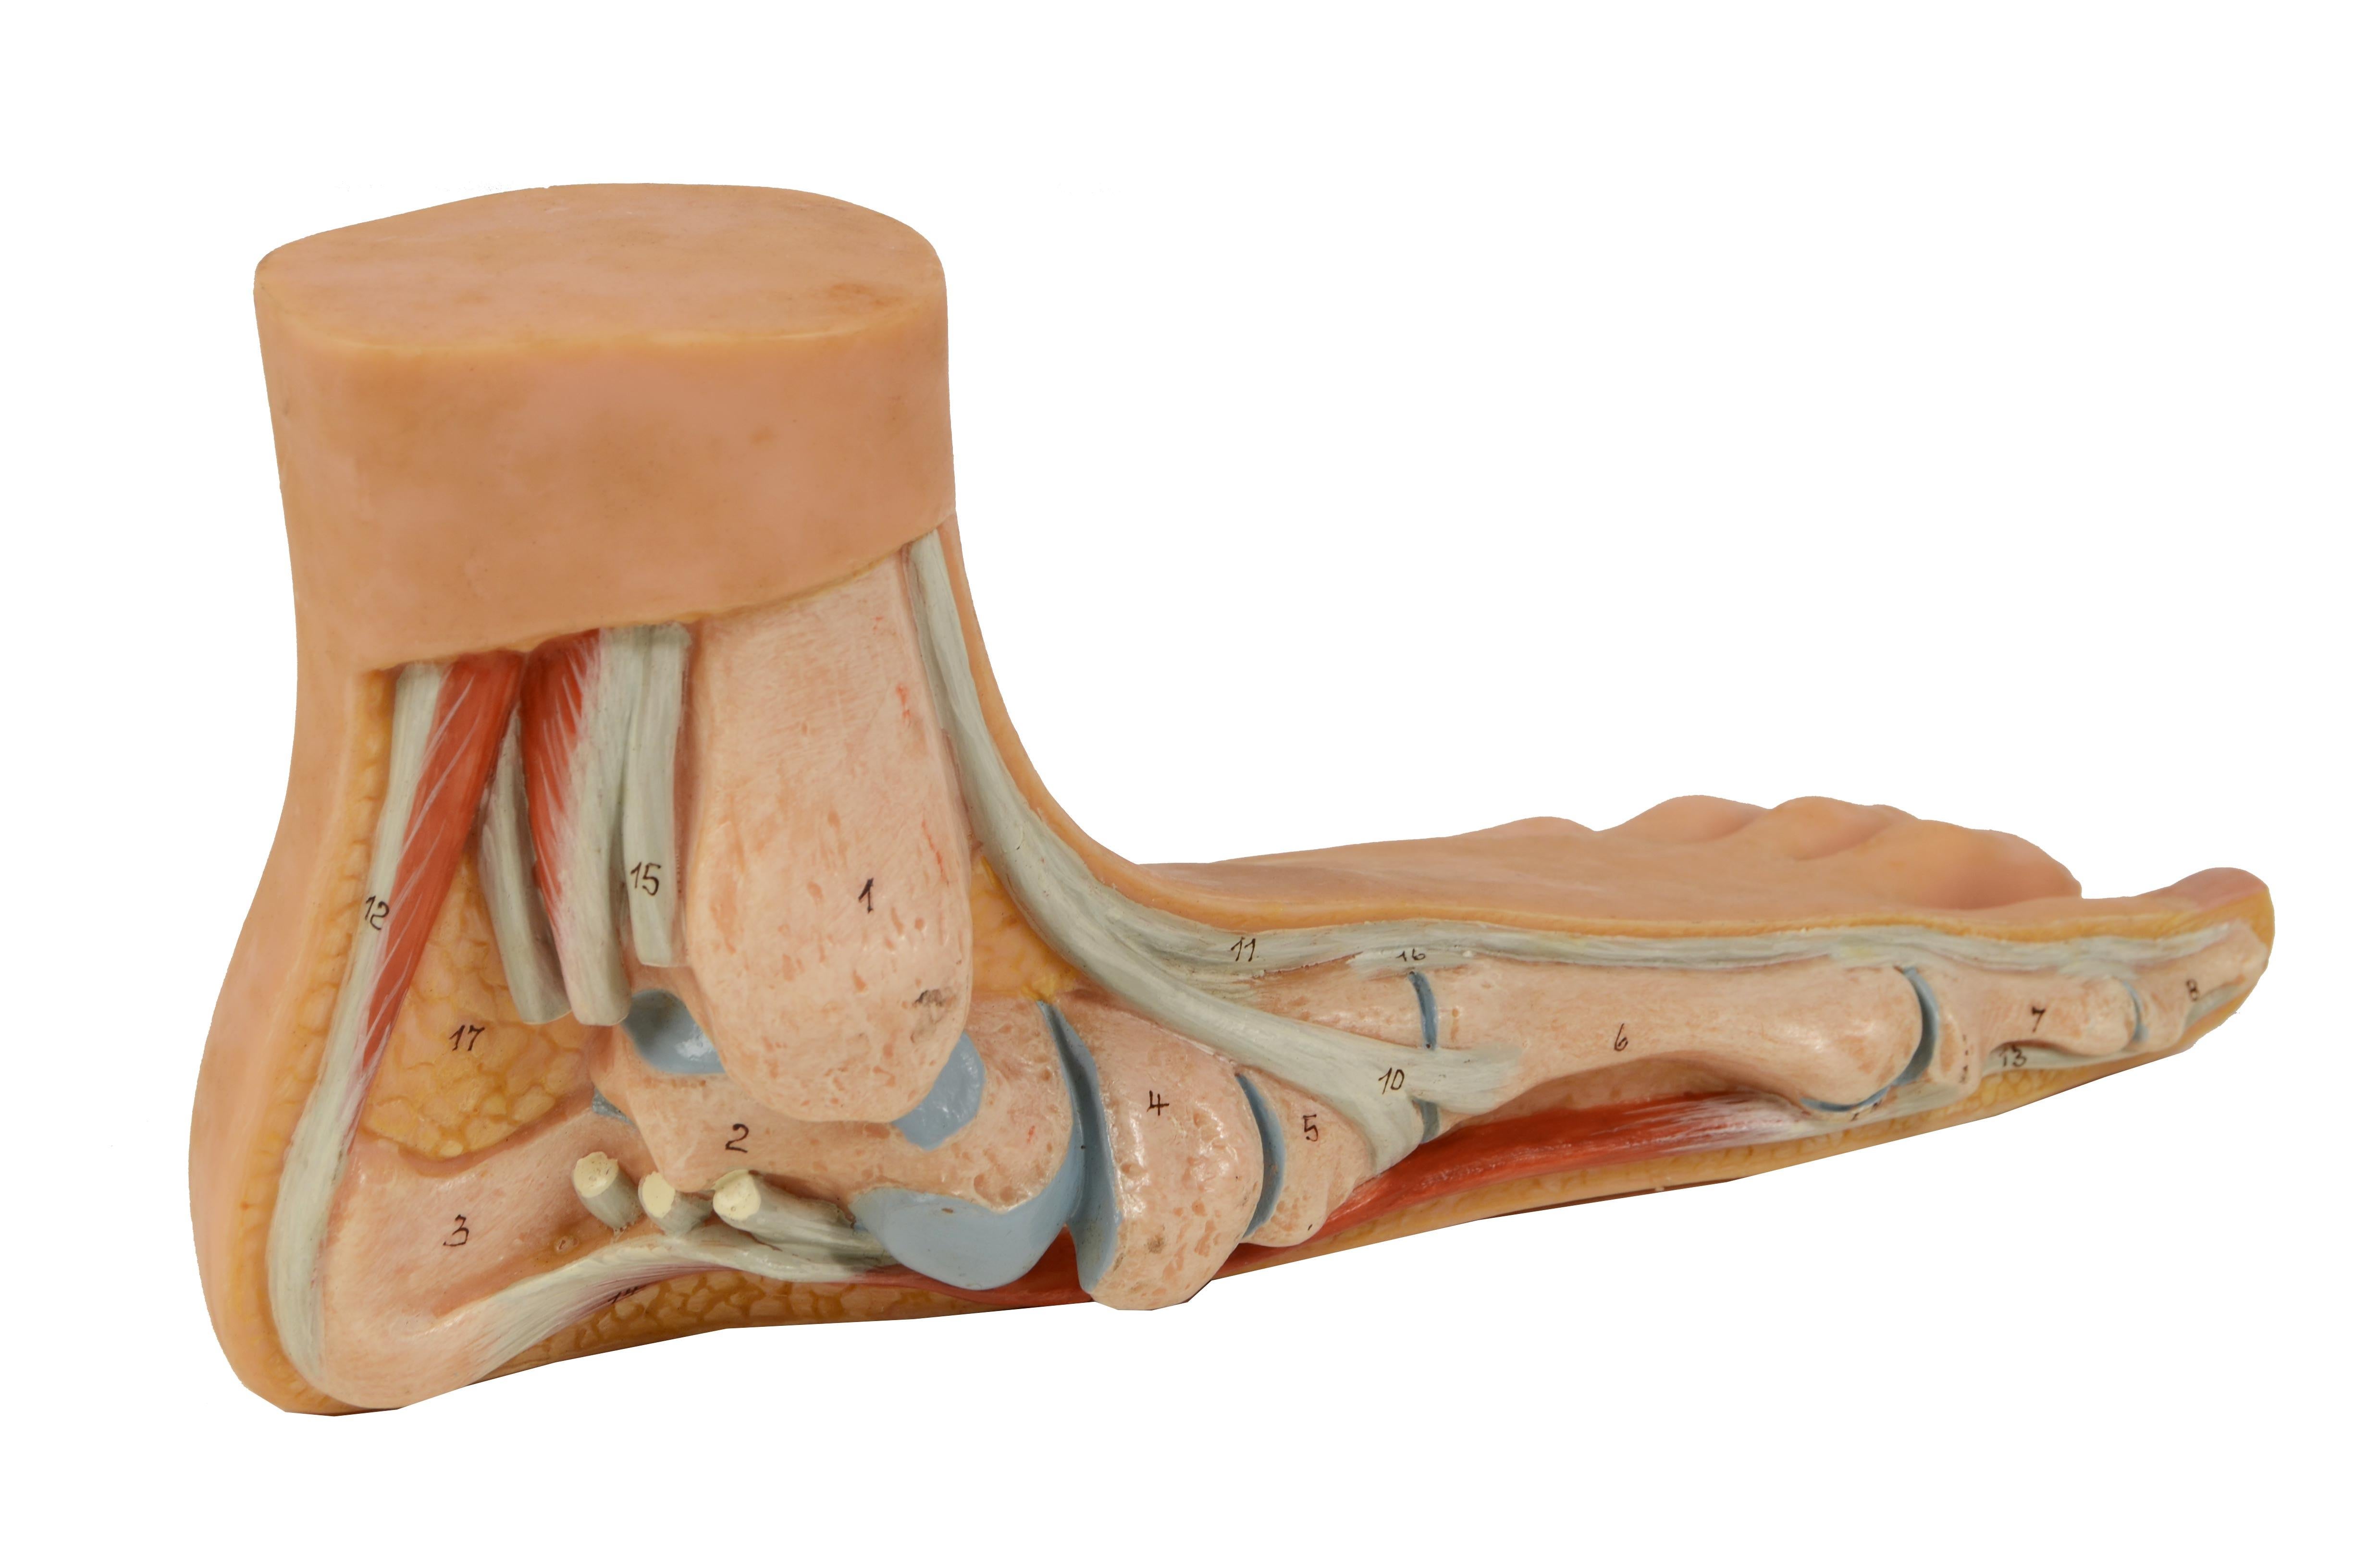 Anatomical teaching model of normal size depicting flat foot 